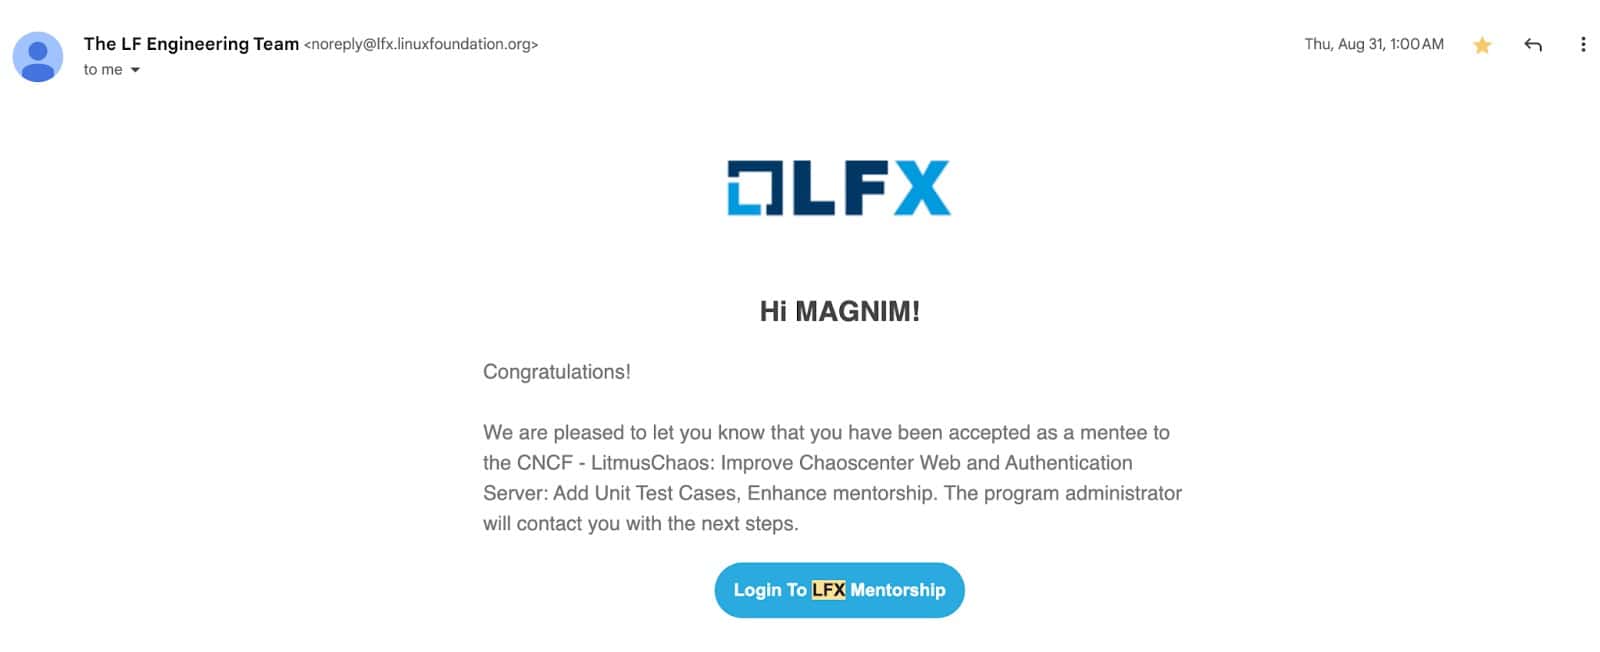 Screenshot showing LFX email t congratulate Magnim to be accepted as a mentee to the CNCF - LitmusChaos: Improve Chaoscenter Web and Authentication Server: Add Unit Test Cases, Enhance mentorship.